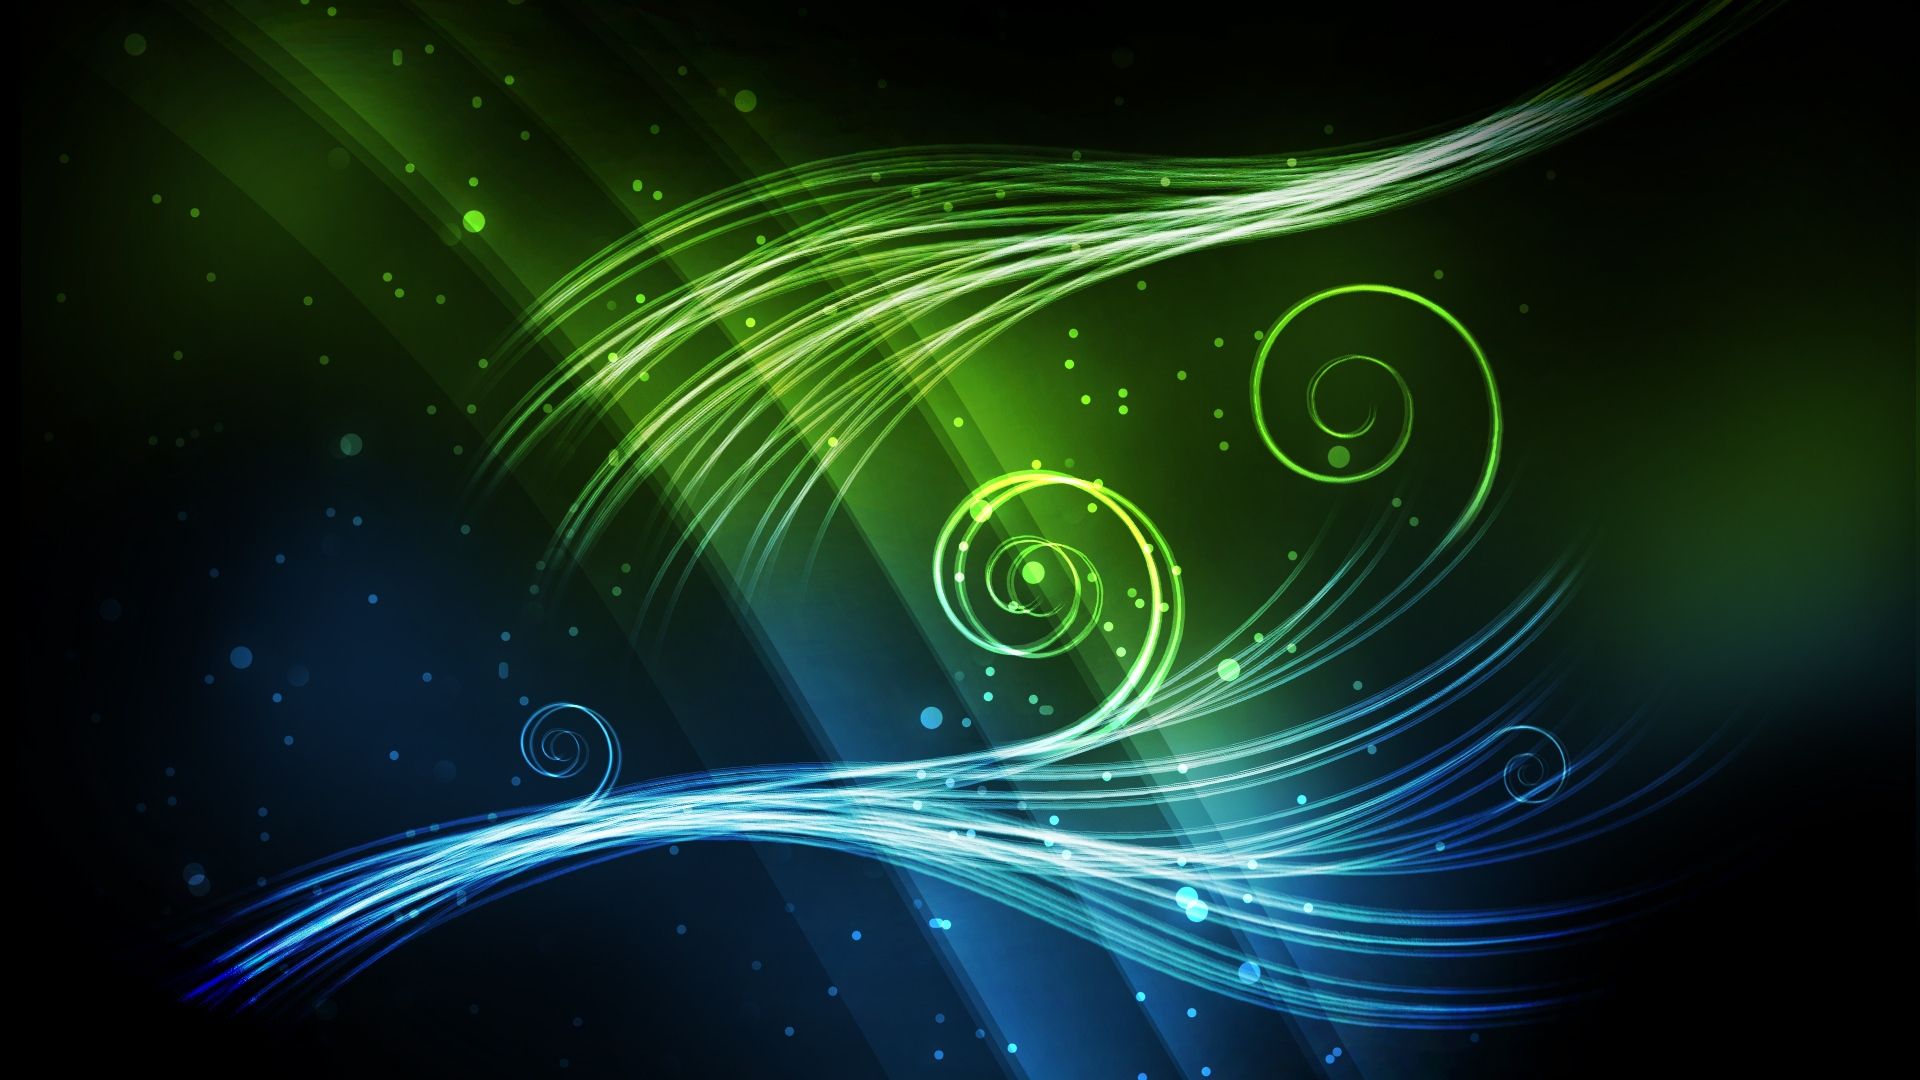 Download Wallpaper 1920x1080 abstract, blue, green, shiny Full HD 1080p HD Background